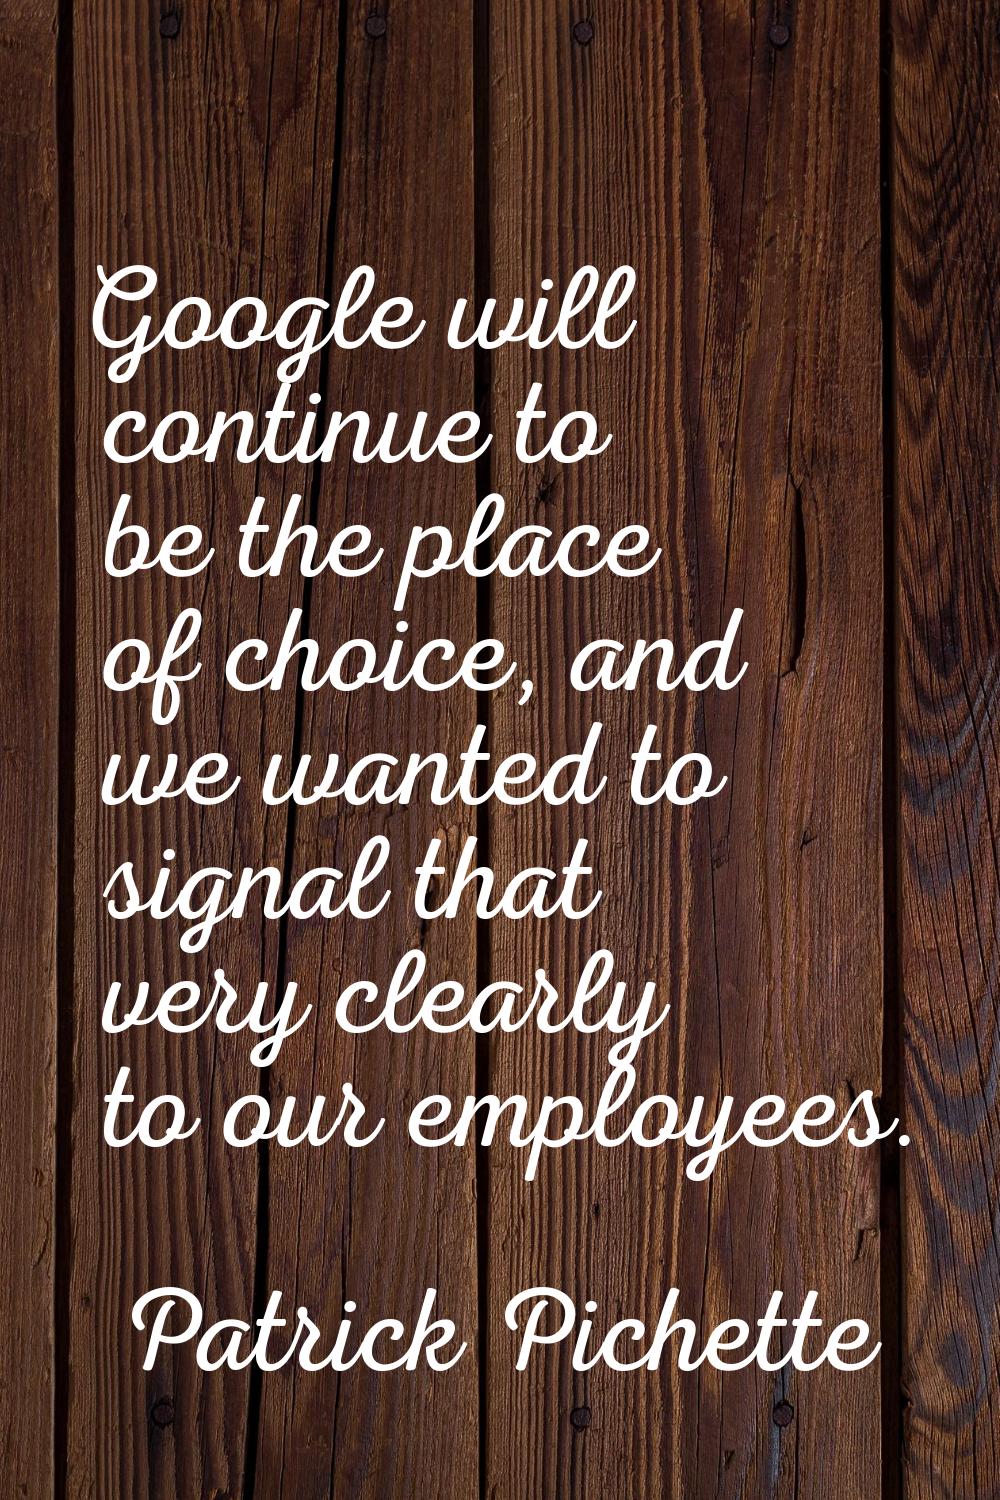 Google will continue to be the place of choice, and we wanted to signal that very clearly to our em